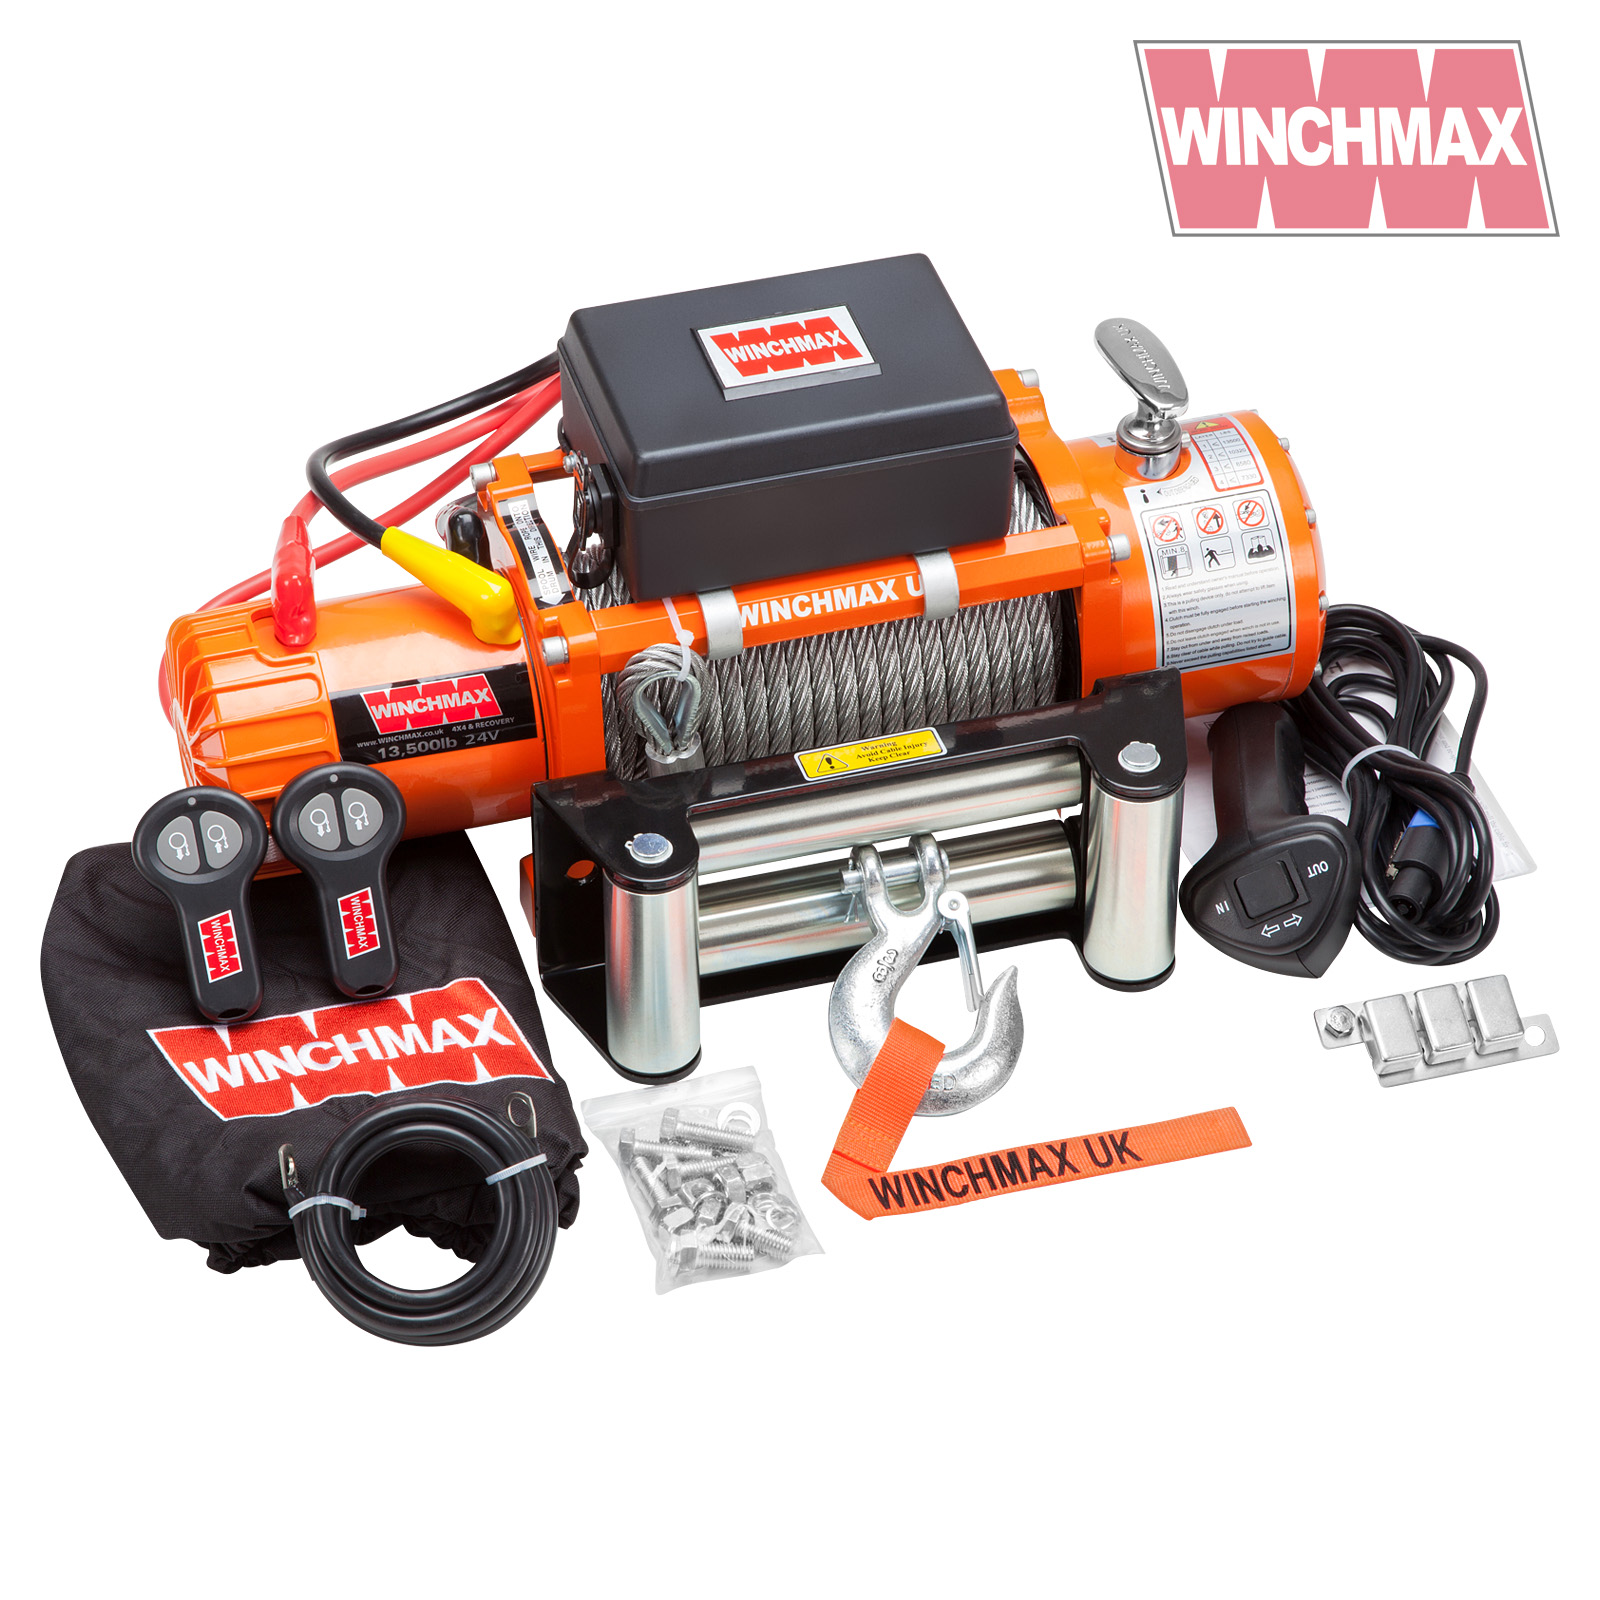 13,500lb (6,123kg) Original Orange 24v Electric Winch. 26m x 9.5mm Steel  Rope, Flat Bed Mounting Plate. - Winchmax